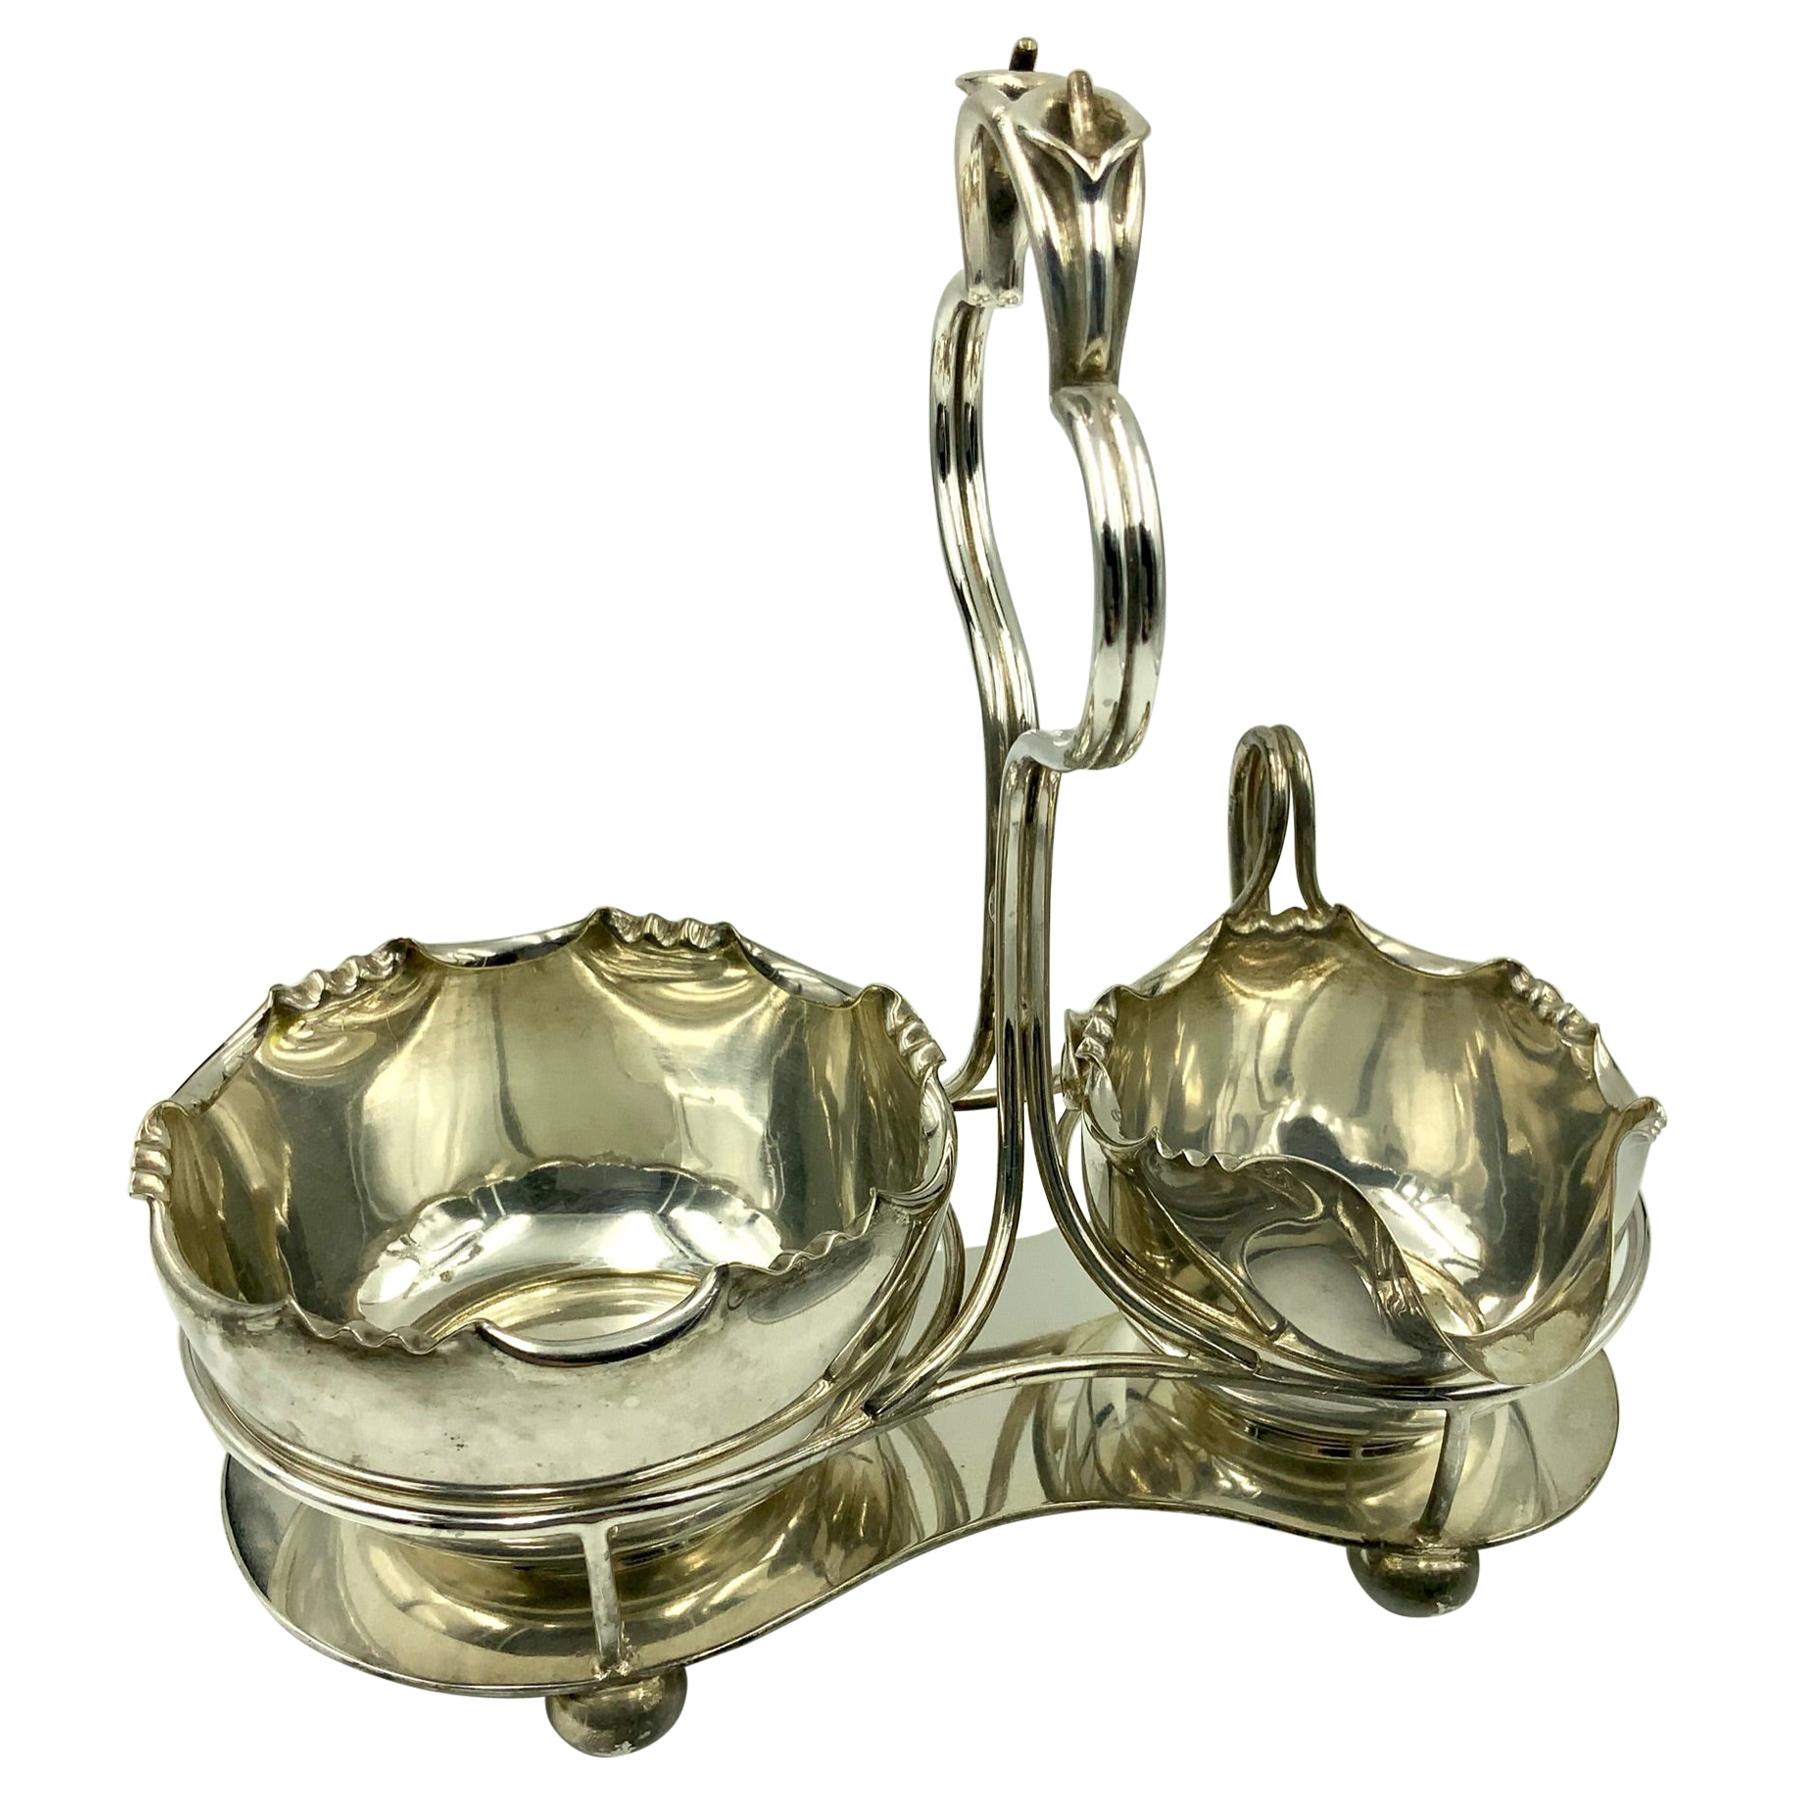 Antique James Dixon & Sons Art Nouveau floral lily silver plate creamer and sugar bowl A stunning three piece set that includes the matching creamer jug, sugar bowl and handled footed carrying tray with a wonderful Art Nouveau pattern. The creamer